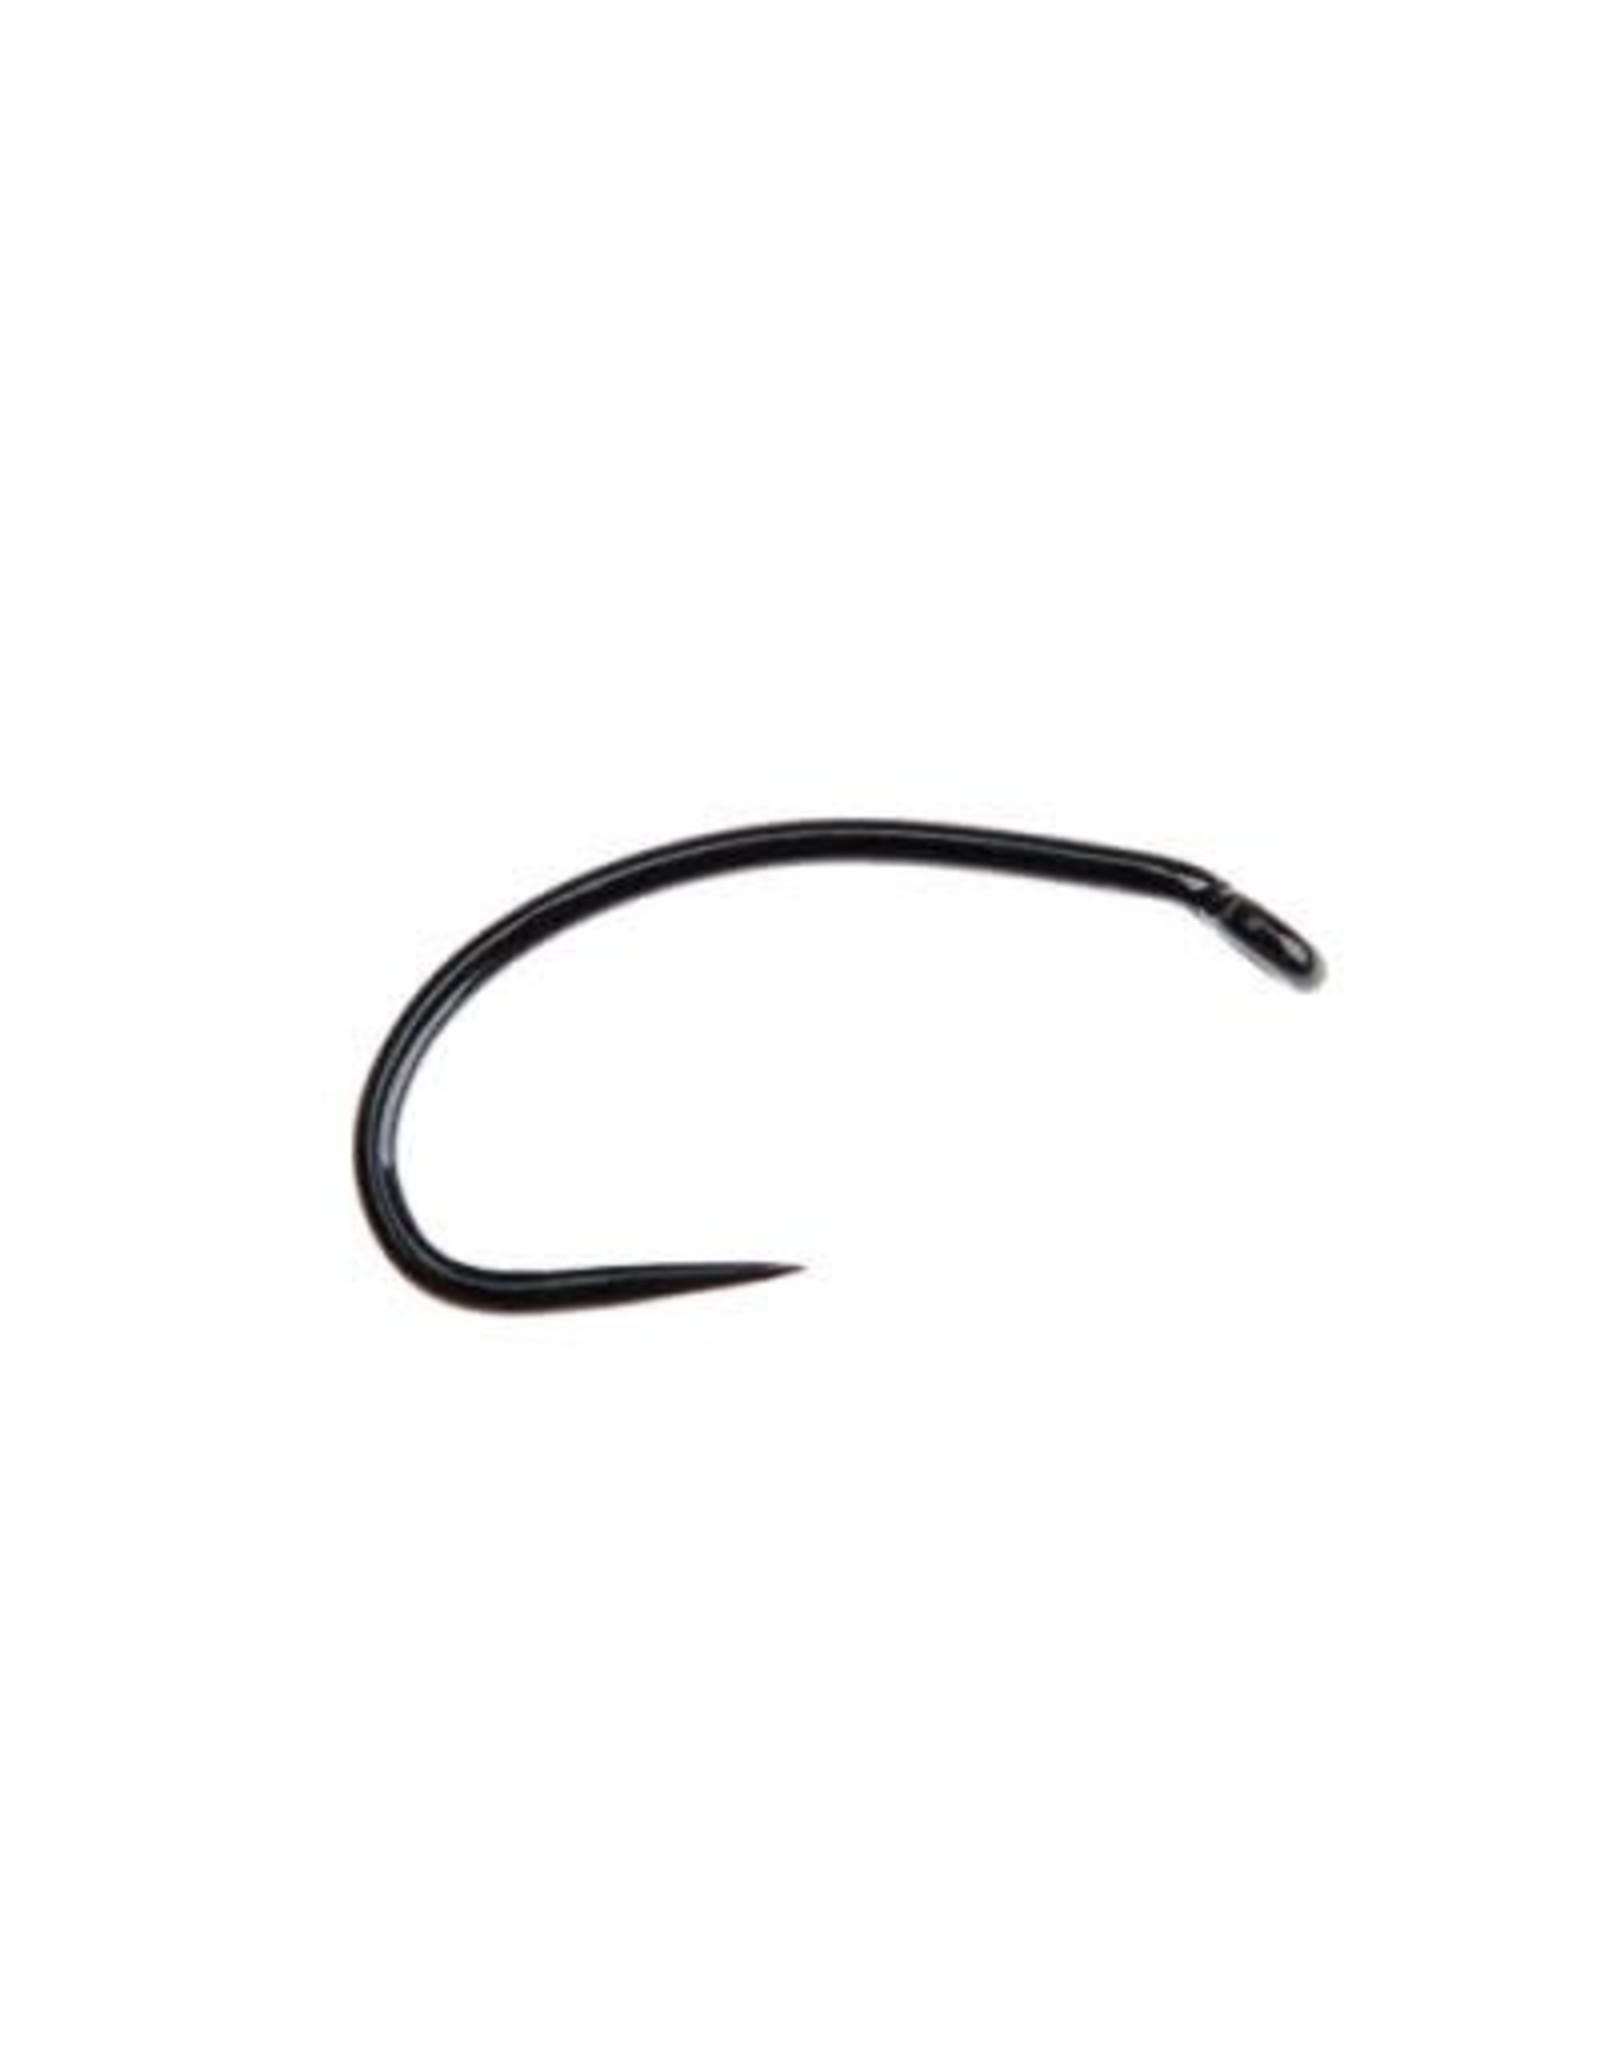 Ahrex Hooks AHREX FW541 #14 Curved Nymph Barbless